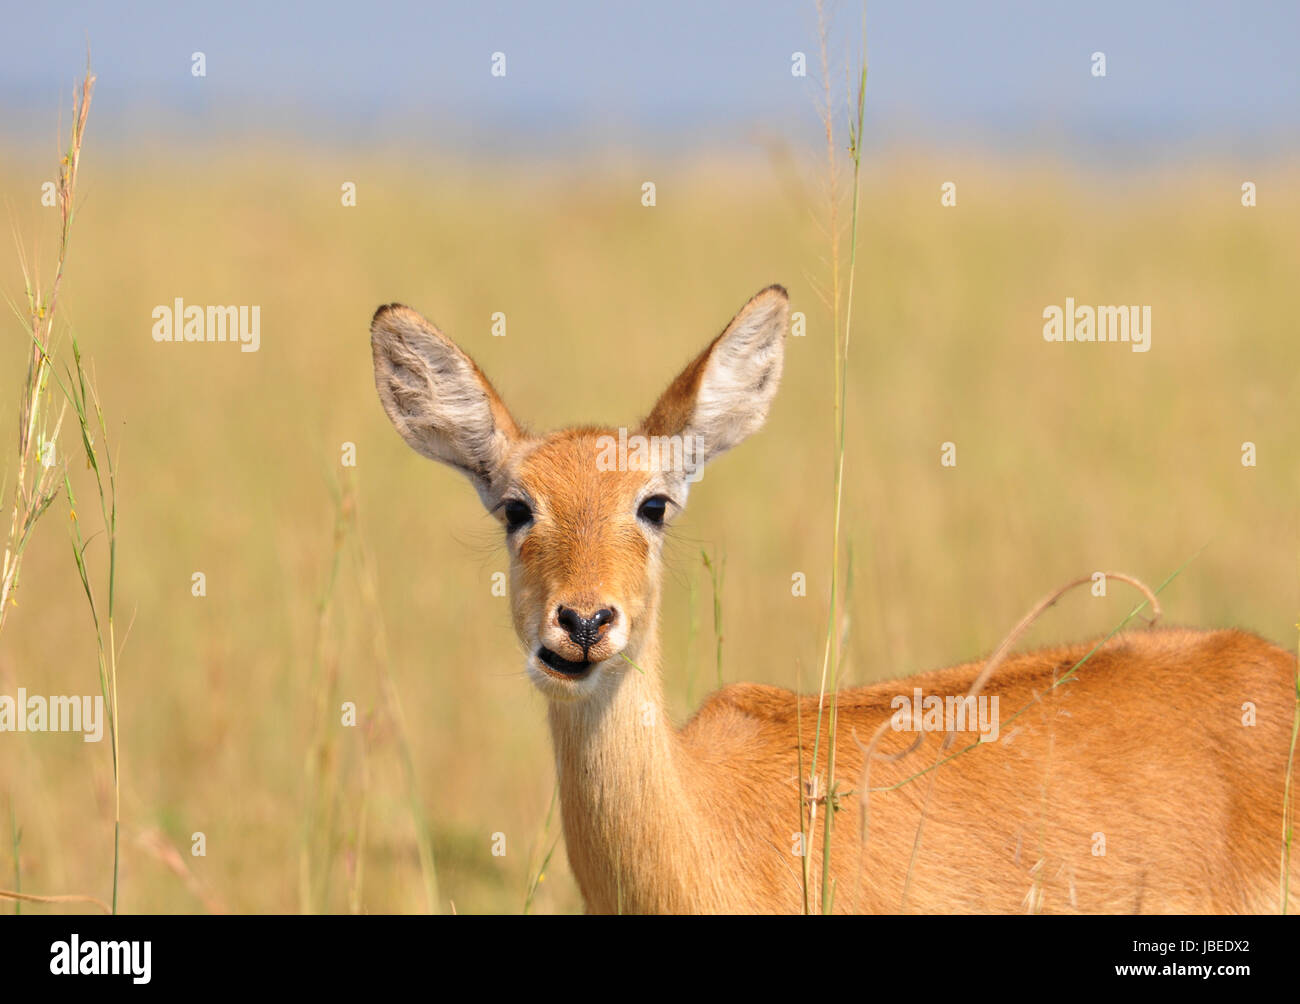 Small antelope in the African savanna Stock Photo